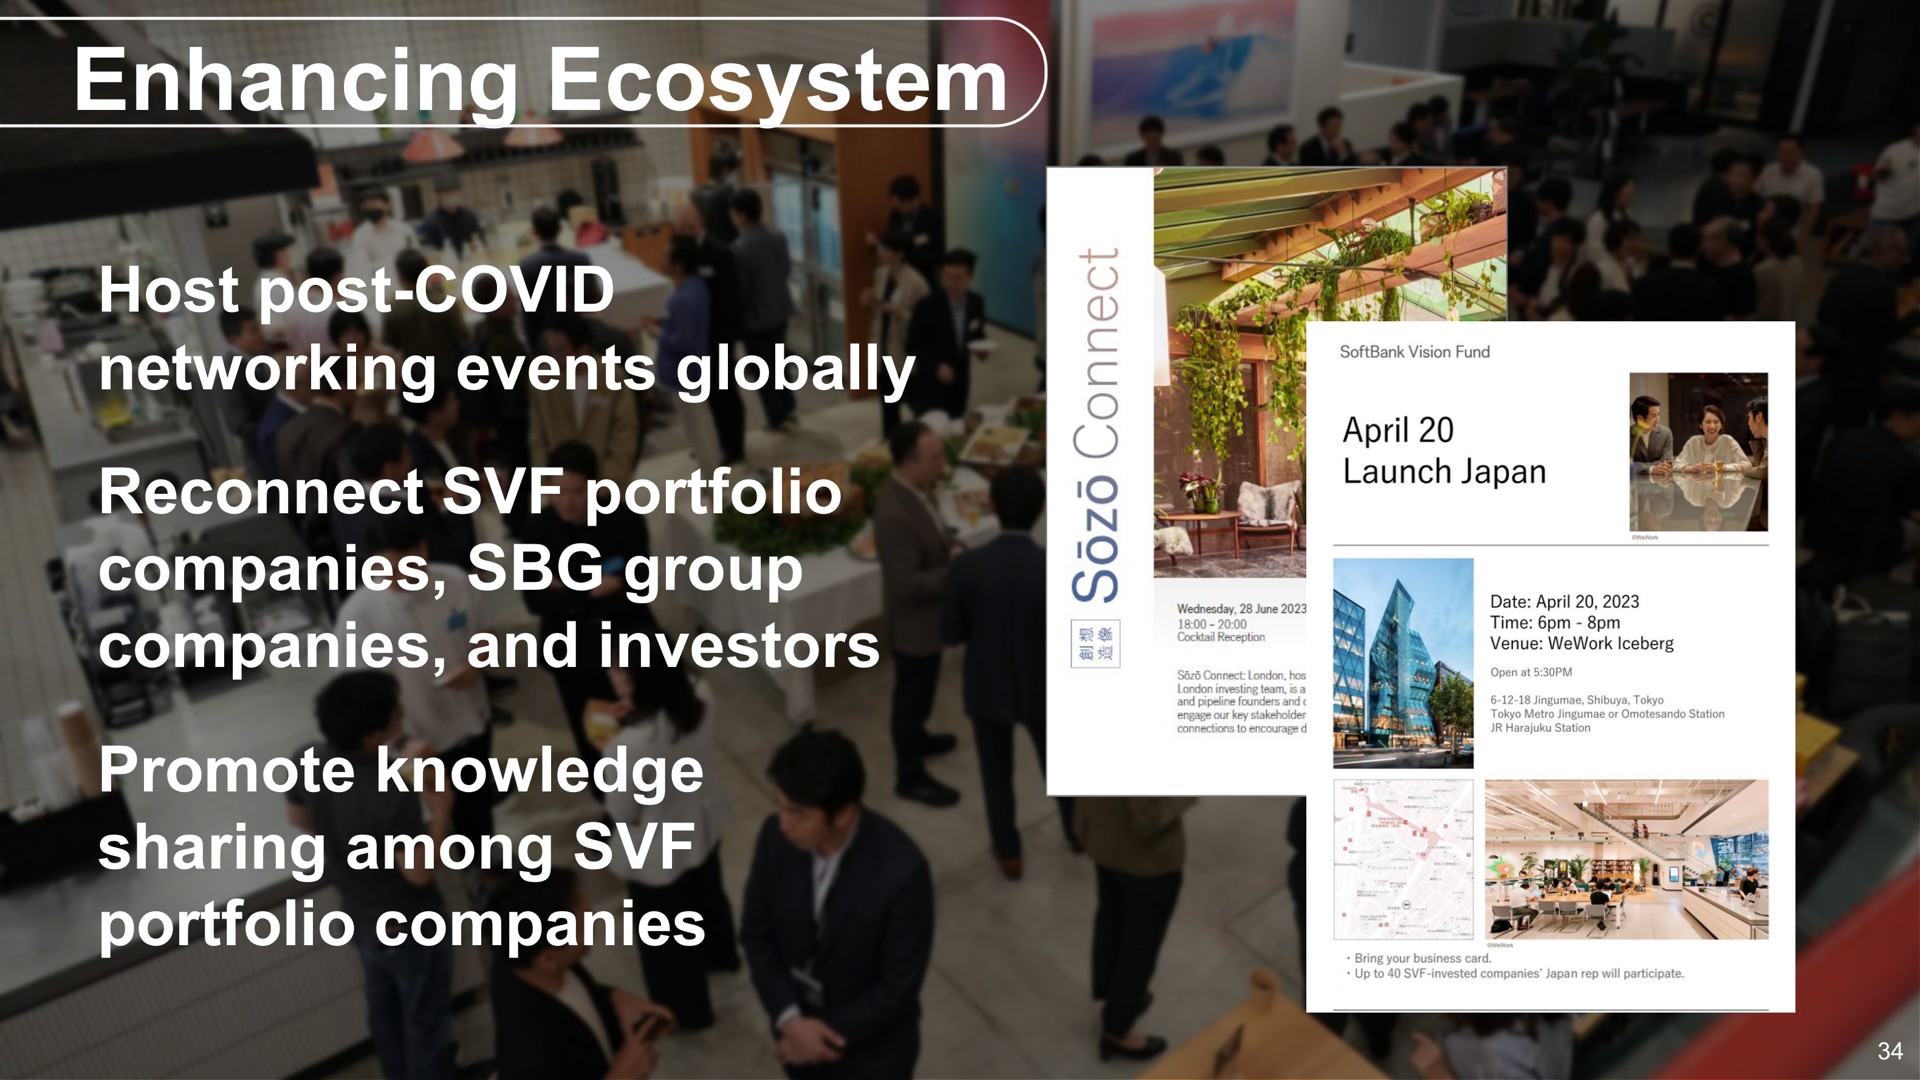 enhancing ecosystem host post covid networking events globally reconnect portfolio companies group companies and investors promote knowledge sharing among portfolio companies | SoftBank